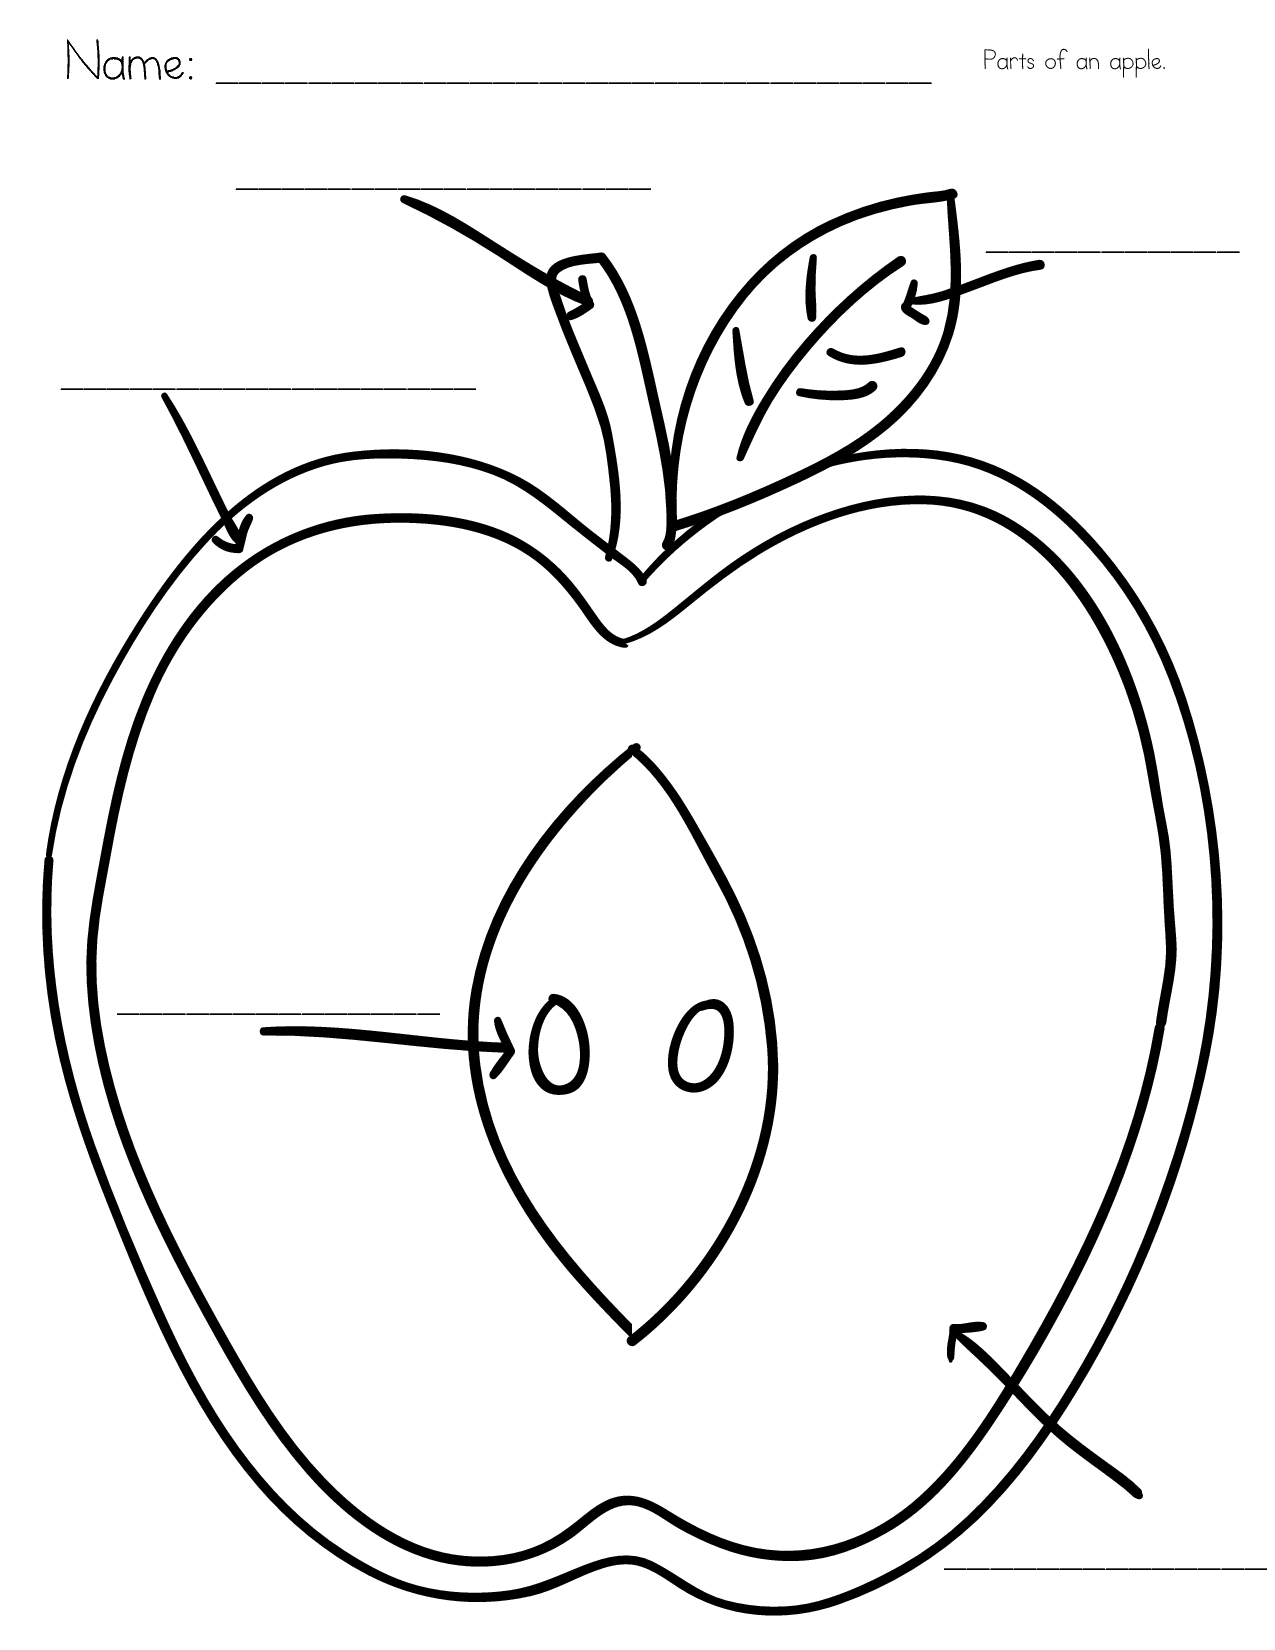 parts of an apple - ClipArt Best - ClipArt Best Within Parts Of An Apple Worksheet